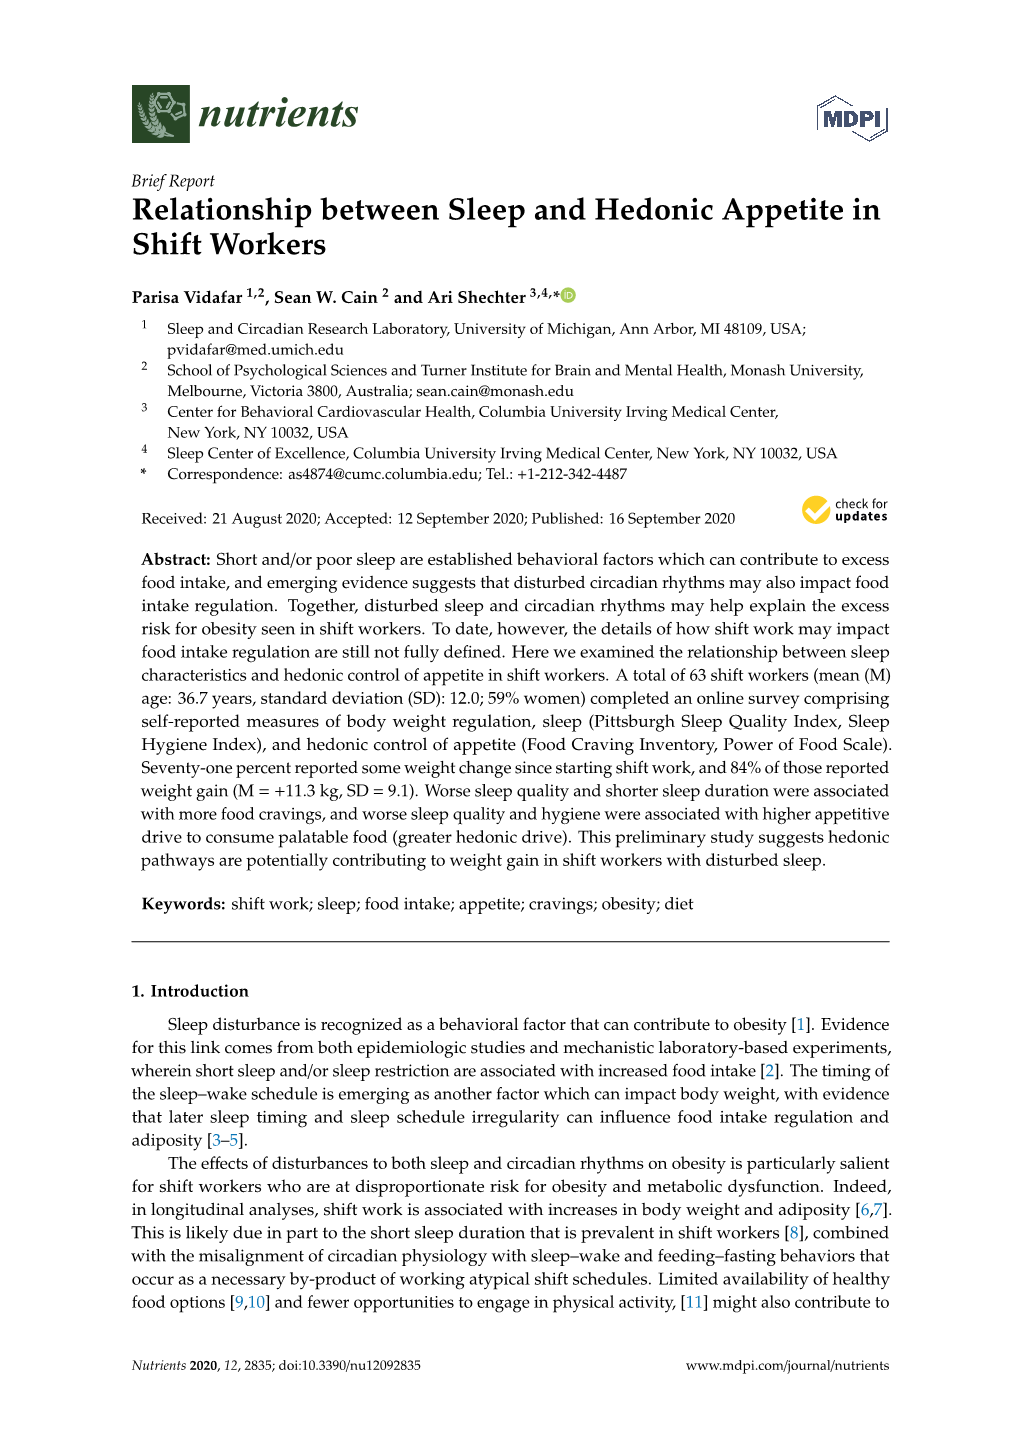 Relationship Between Sleep and Hedonic Appetite in Shift Workers